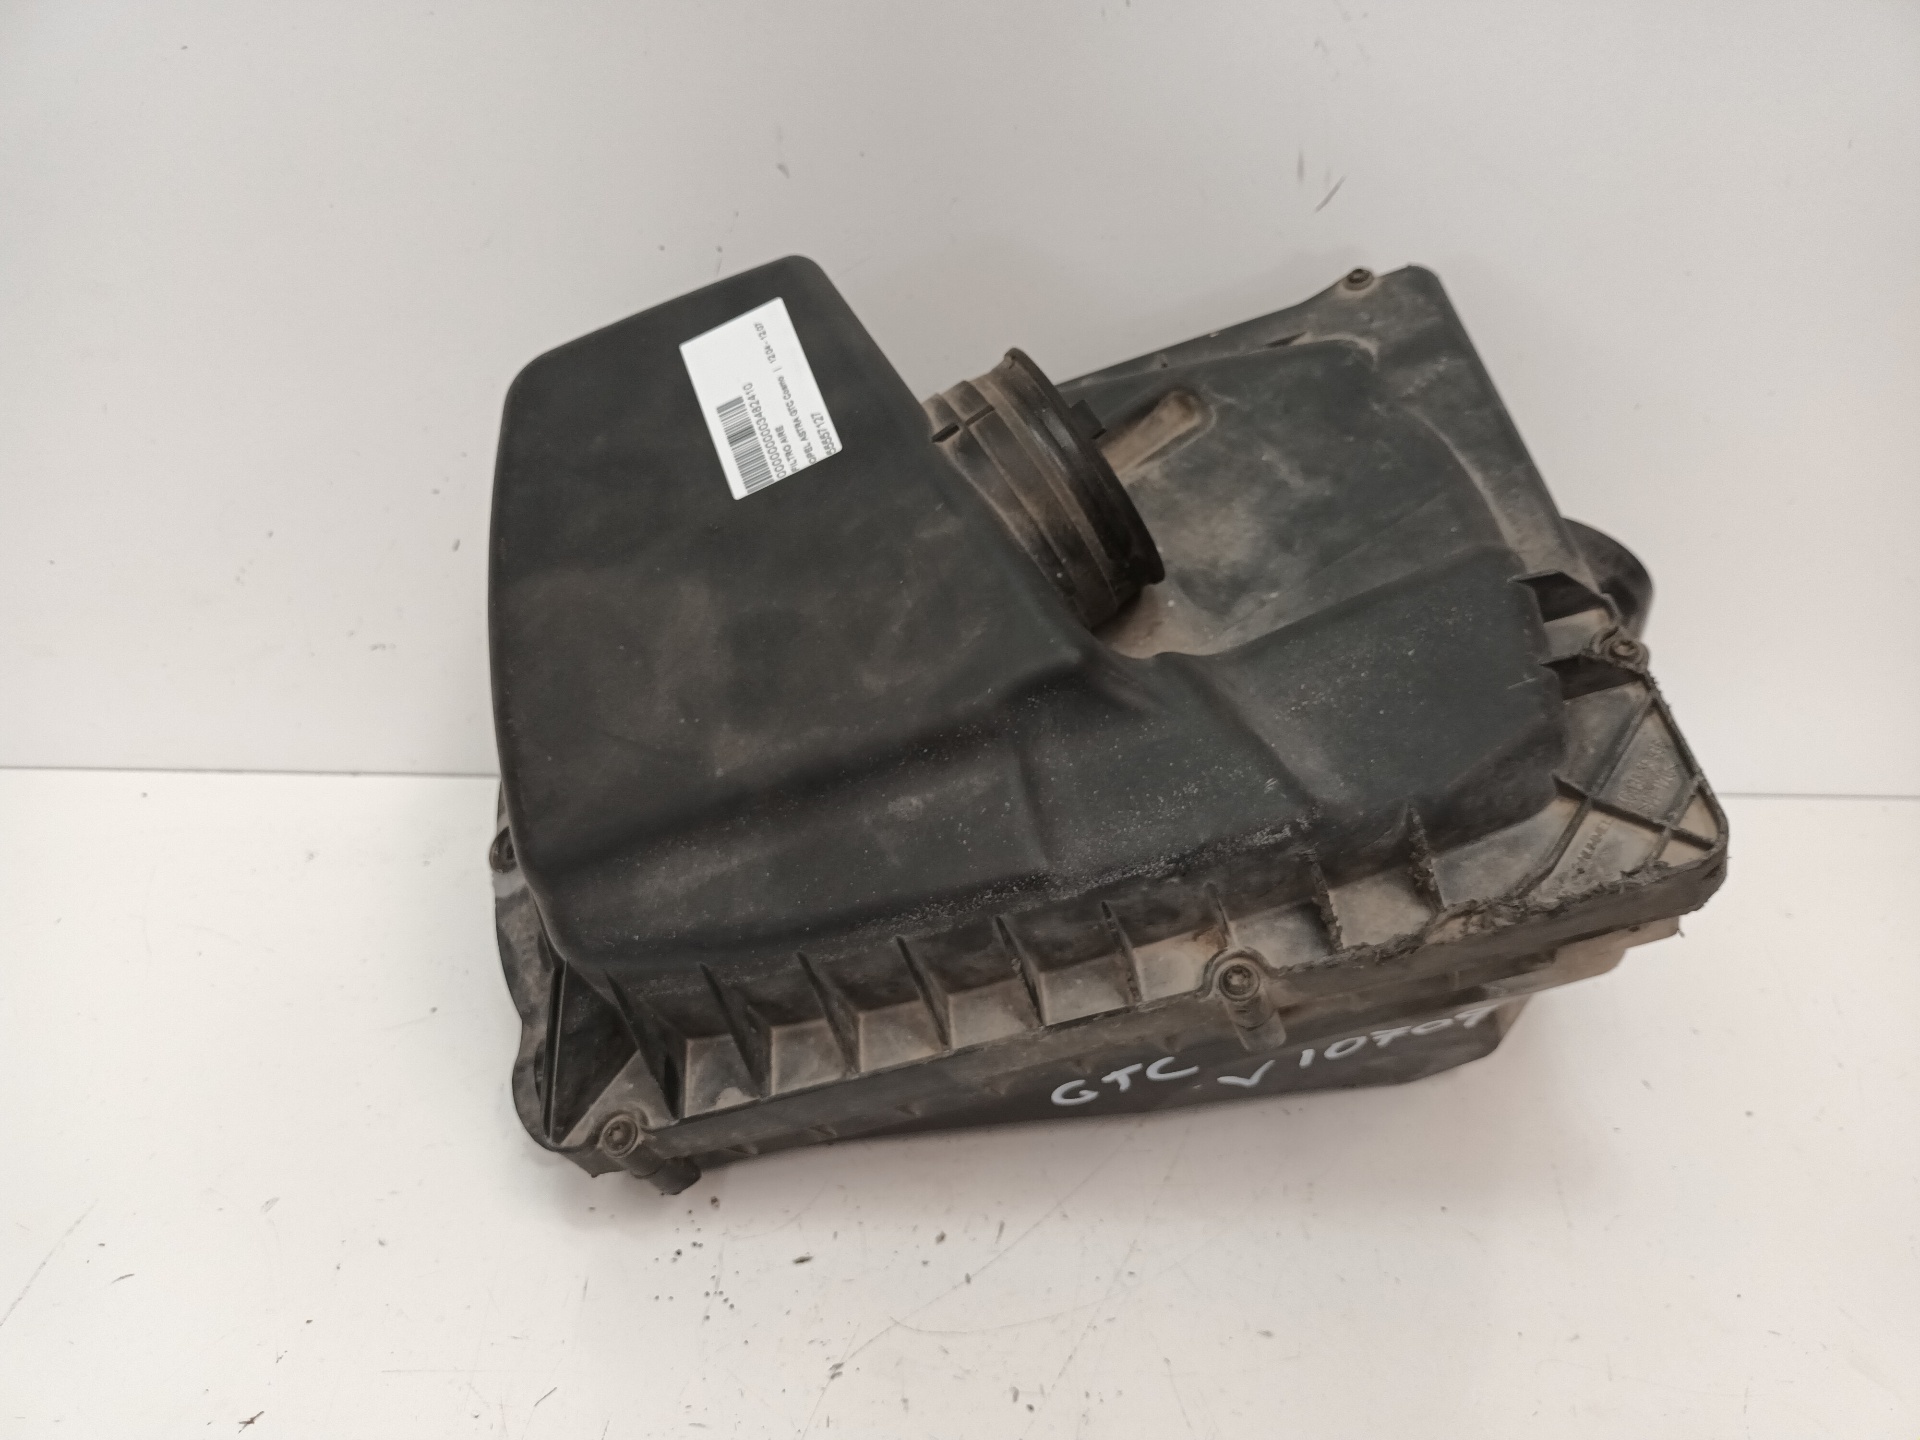 SUBARU Astra H (2004-2014) Other Engine Compartment Parts 55557127 25276119